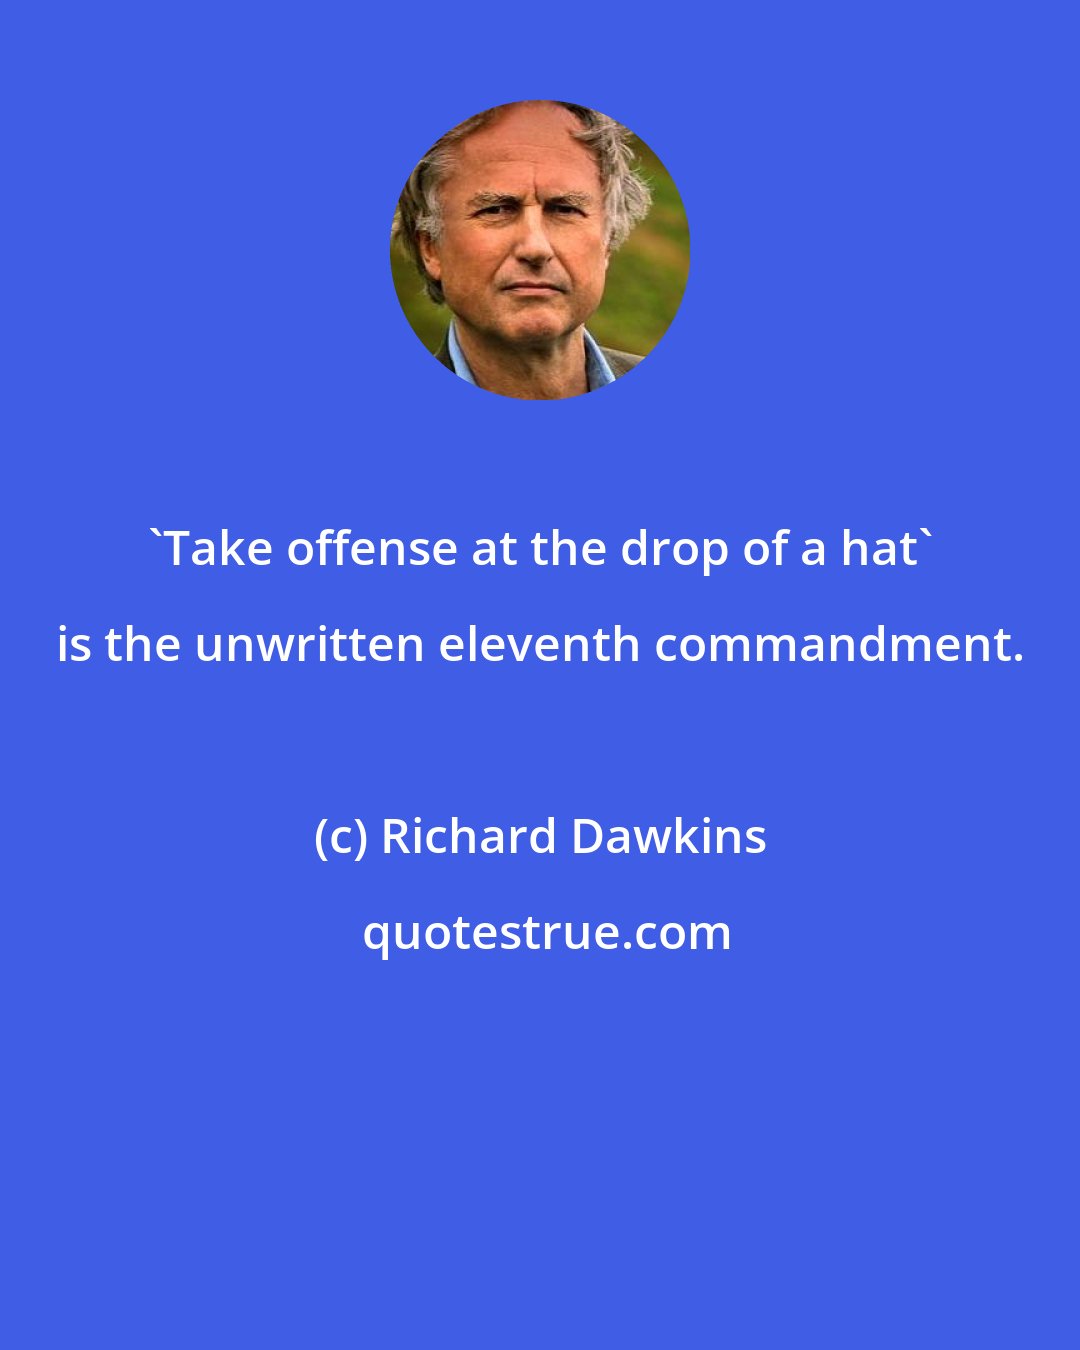 Richard Dawkins: 'Take offense at the drop of a hat' is the unwritten eleventh commandment.